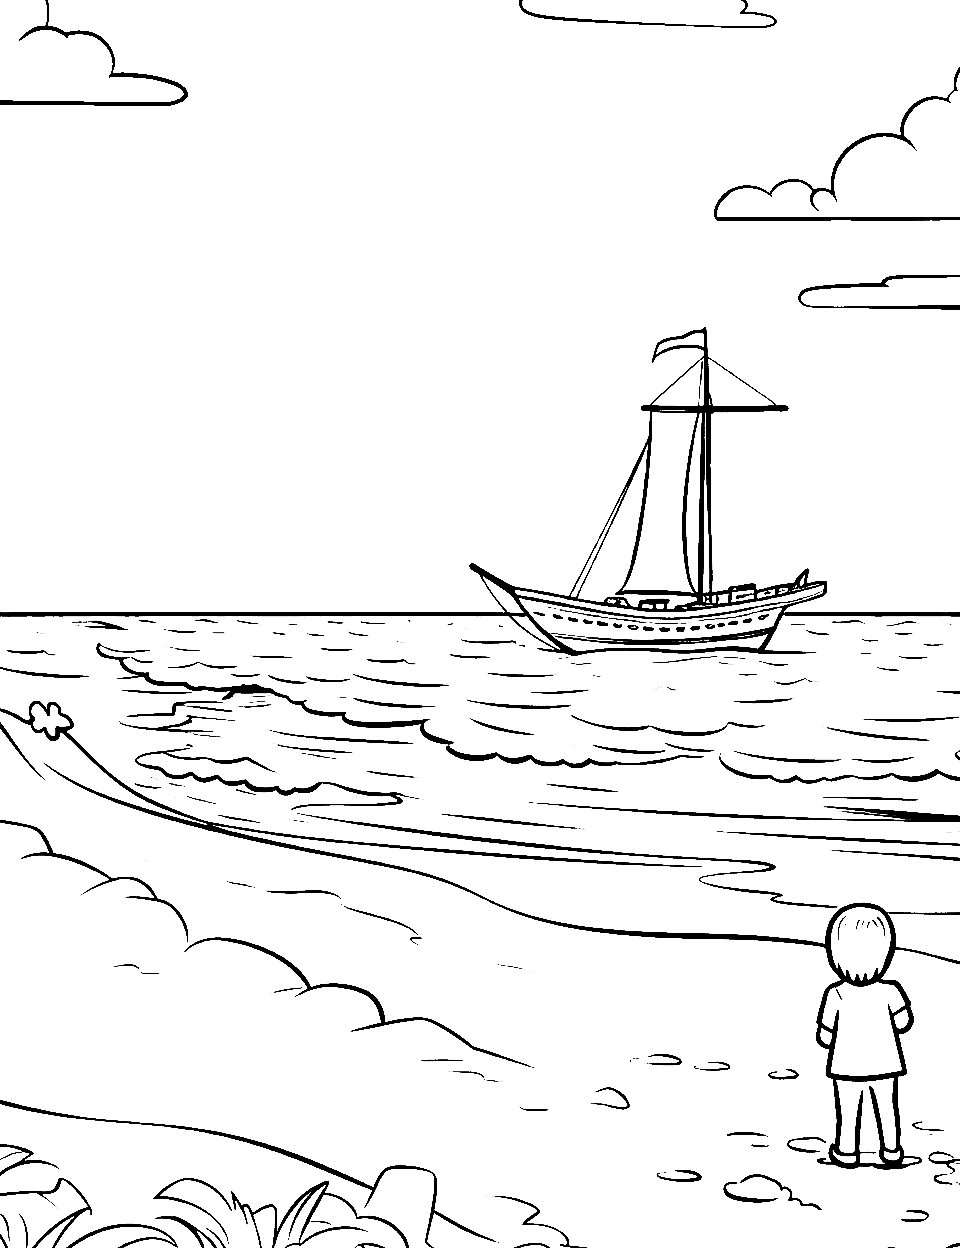 Pirate Ship in Distance Coloring Page - A kid looking at a distant, small pirate ship from the shore.